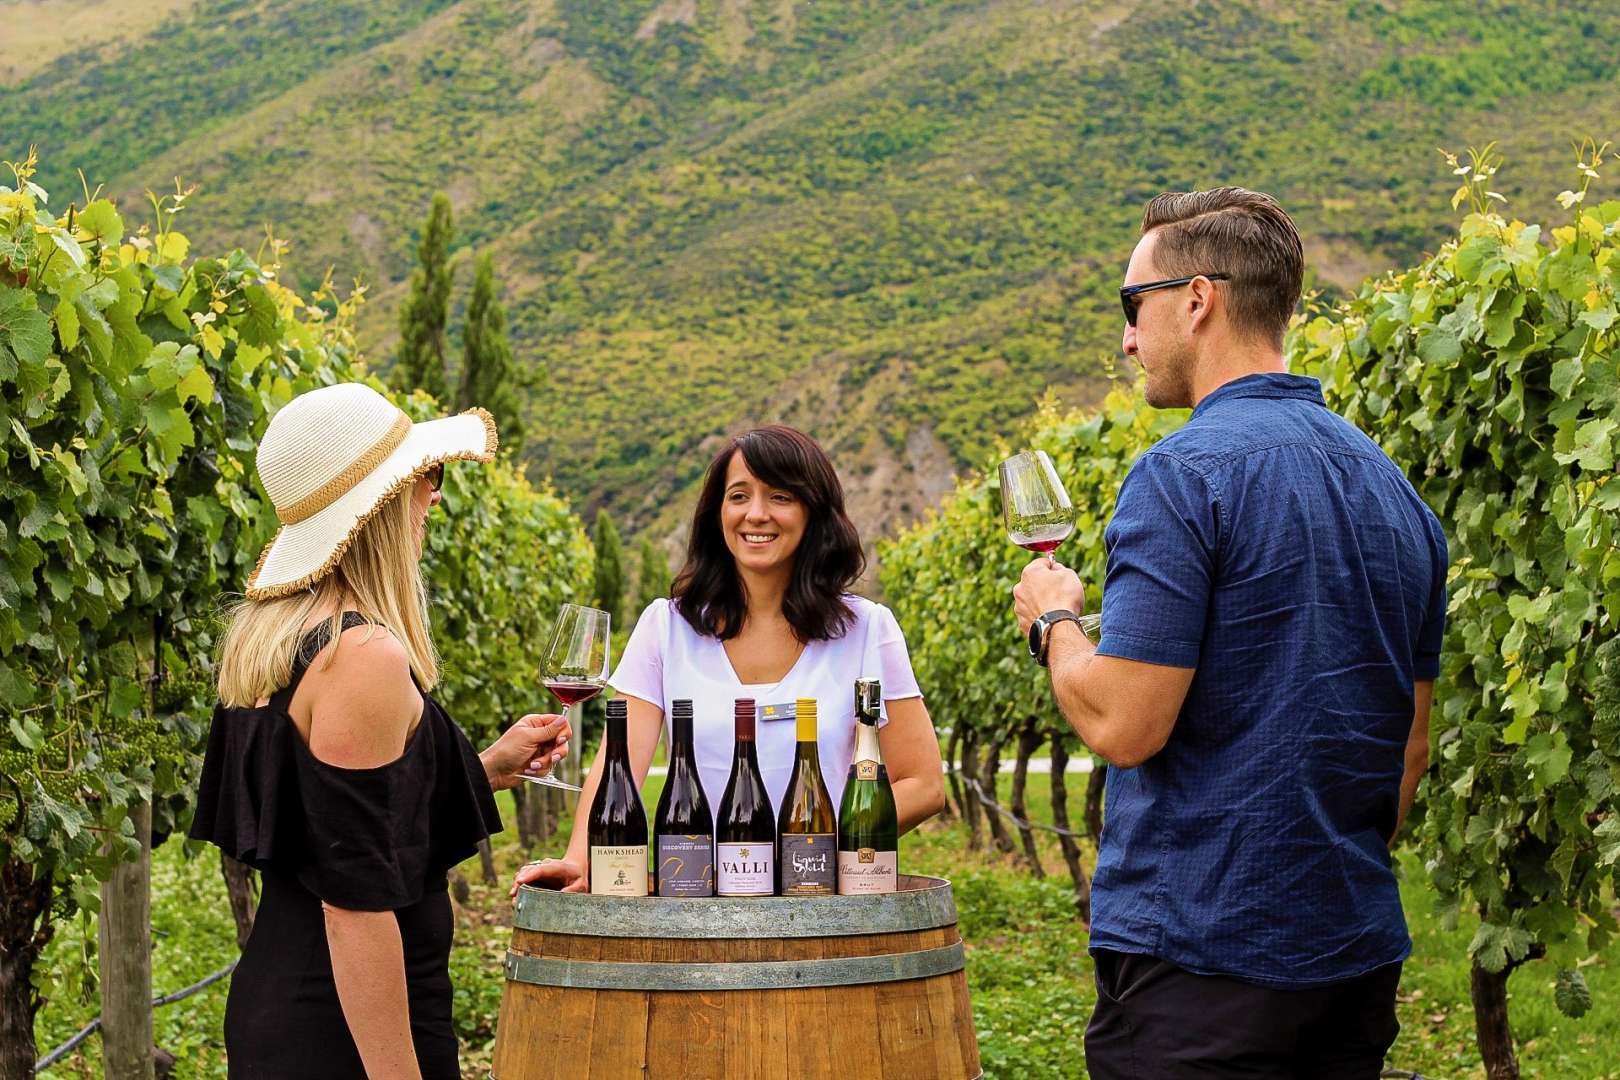 Enjoy wine tastings with your very own host